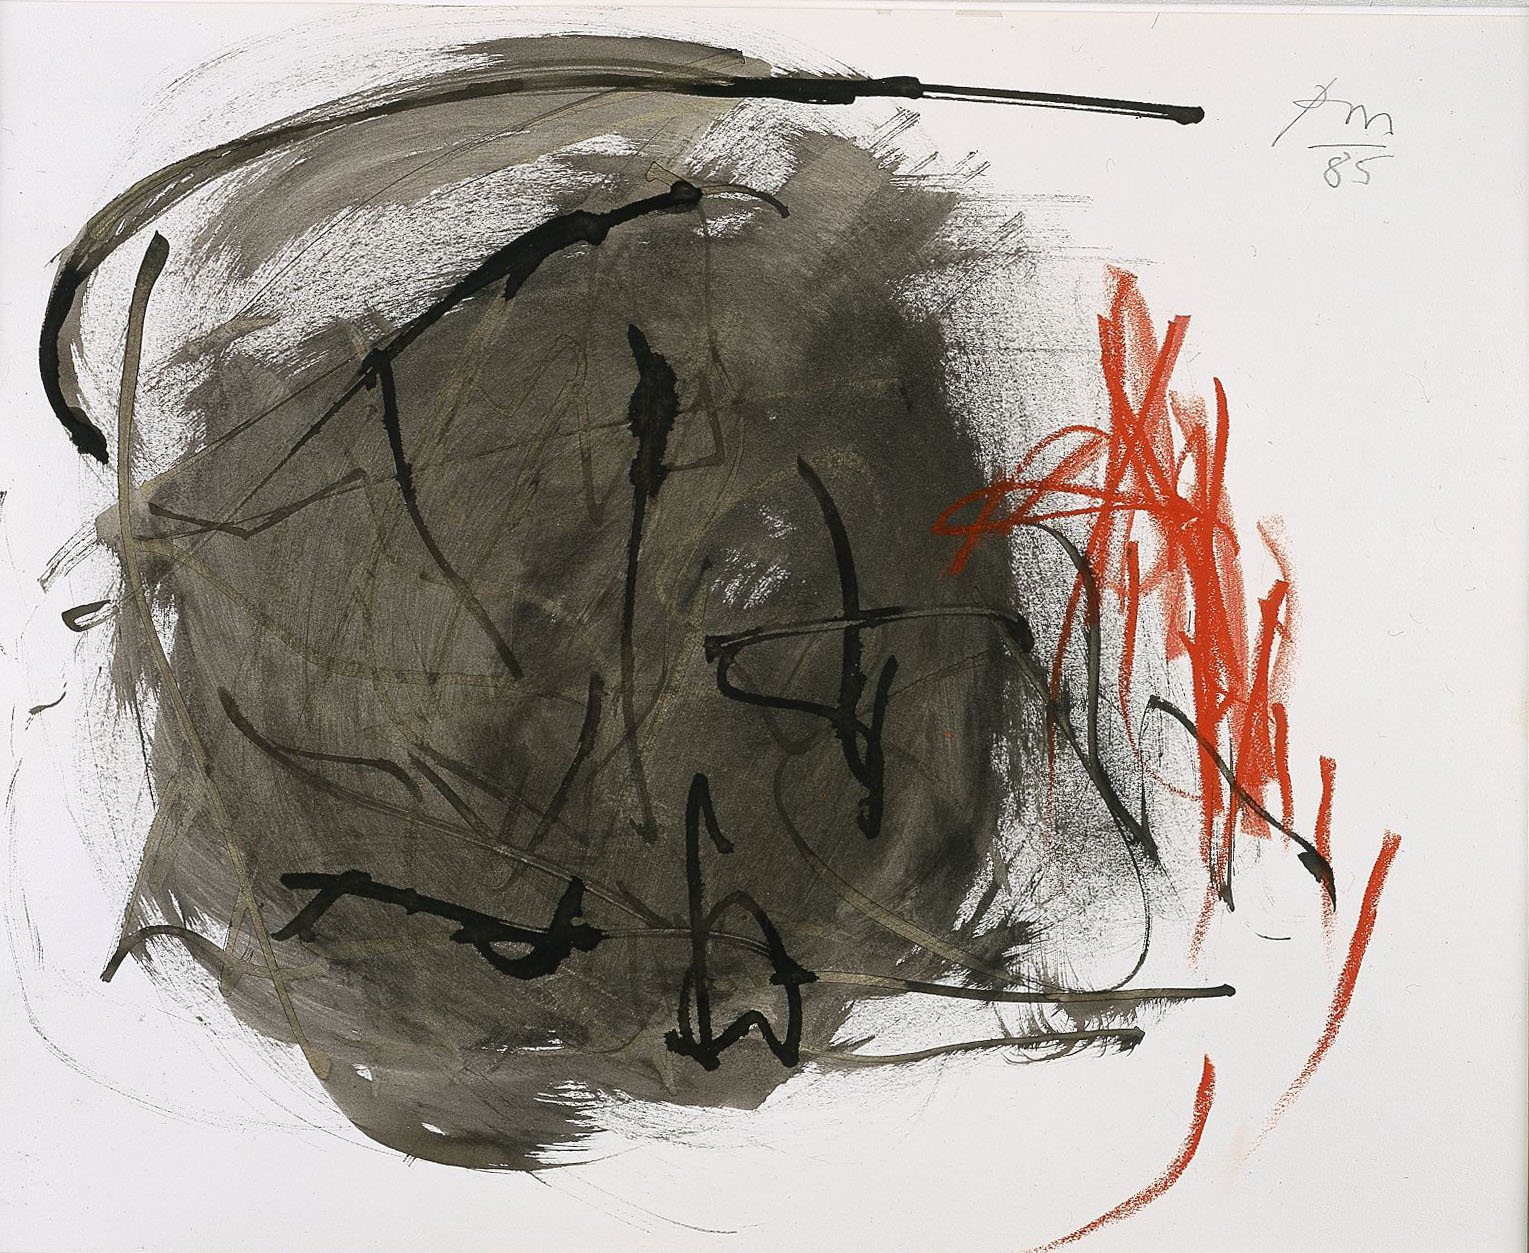 Untitled (Wash and Line Drawing), 1985, ink, ink wash, and crayon on paper, 10 7/8 ✕ 13 5/8 in. (27.6 ✕ 34.6 cm)